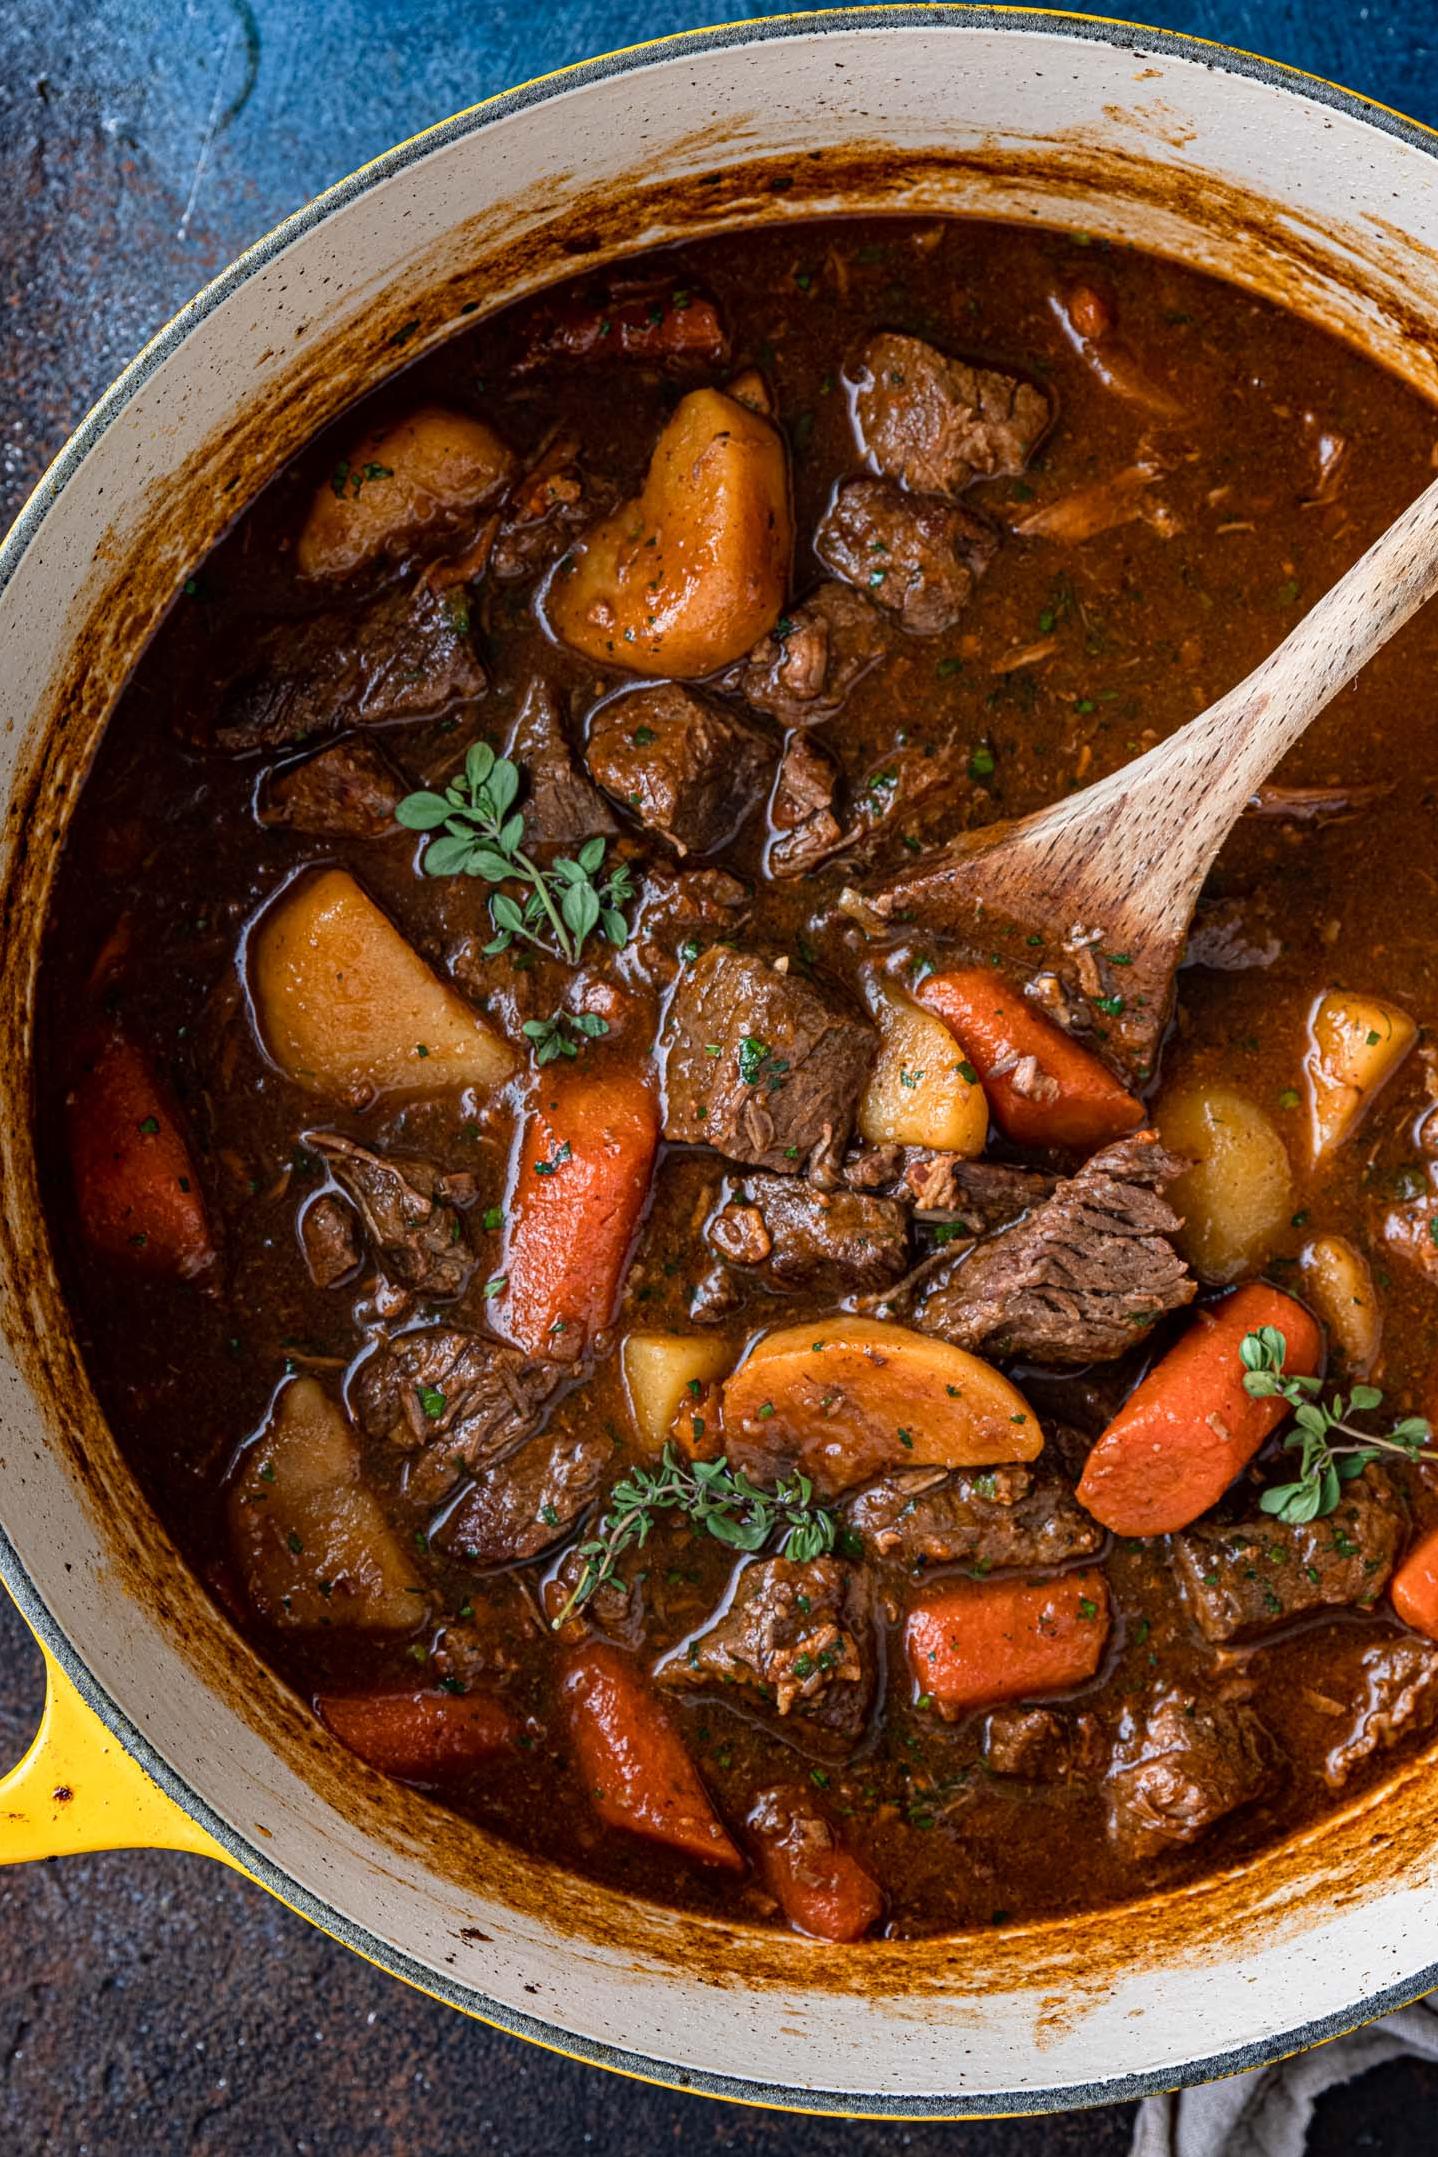  A hearty bowl of Beef and Guinness Irish Stew, perfect for a cold winter's day